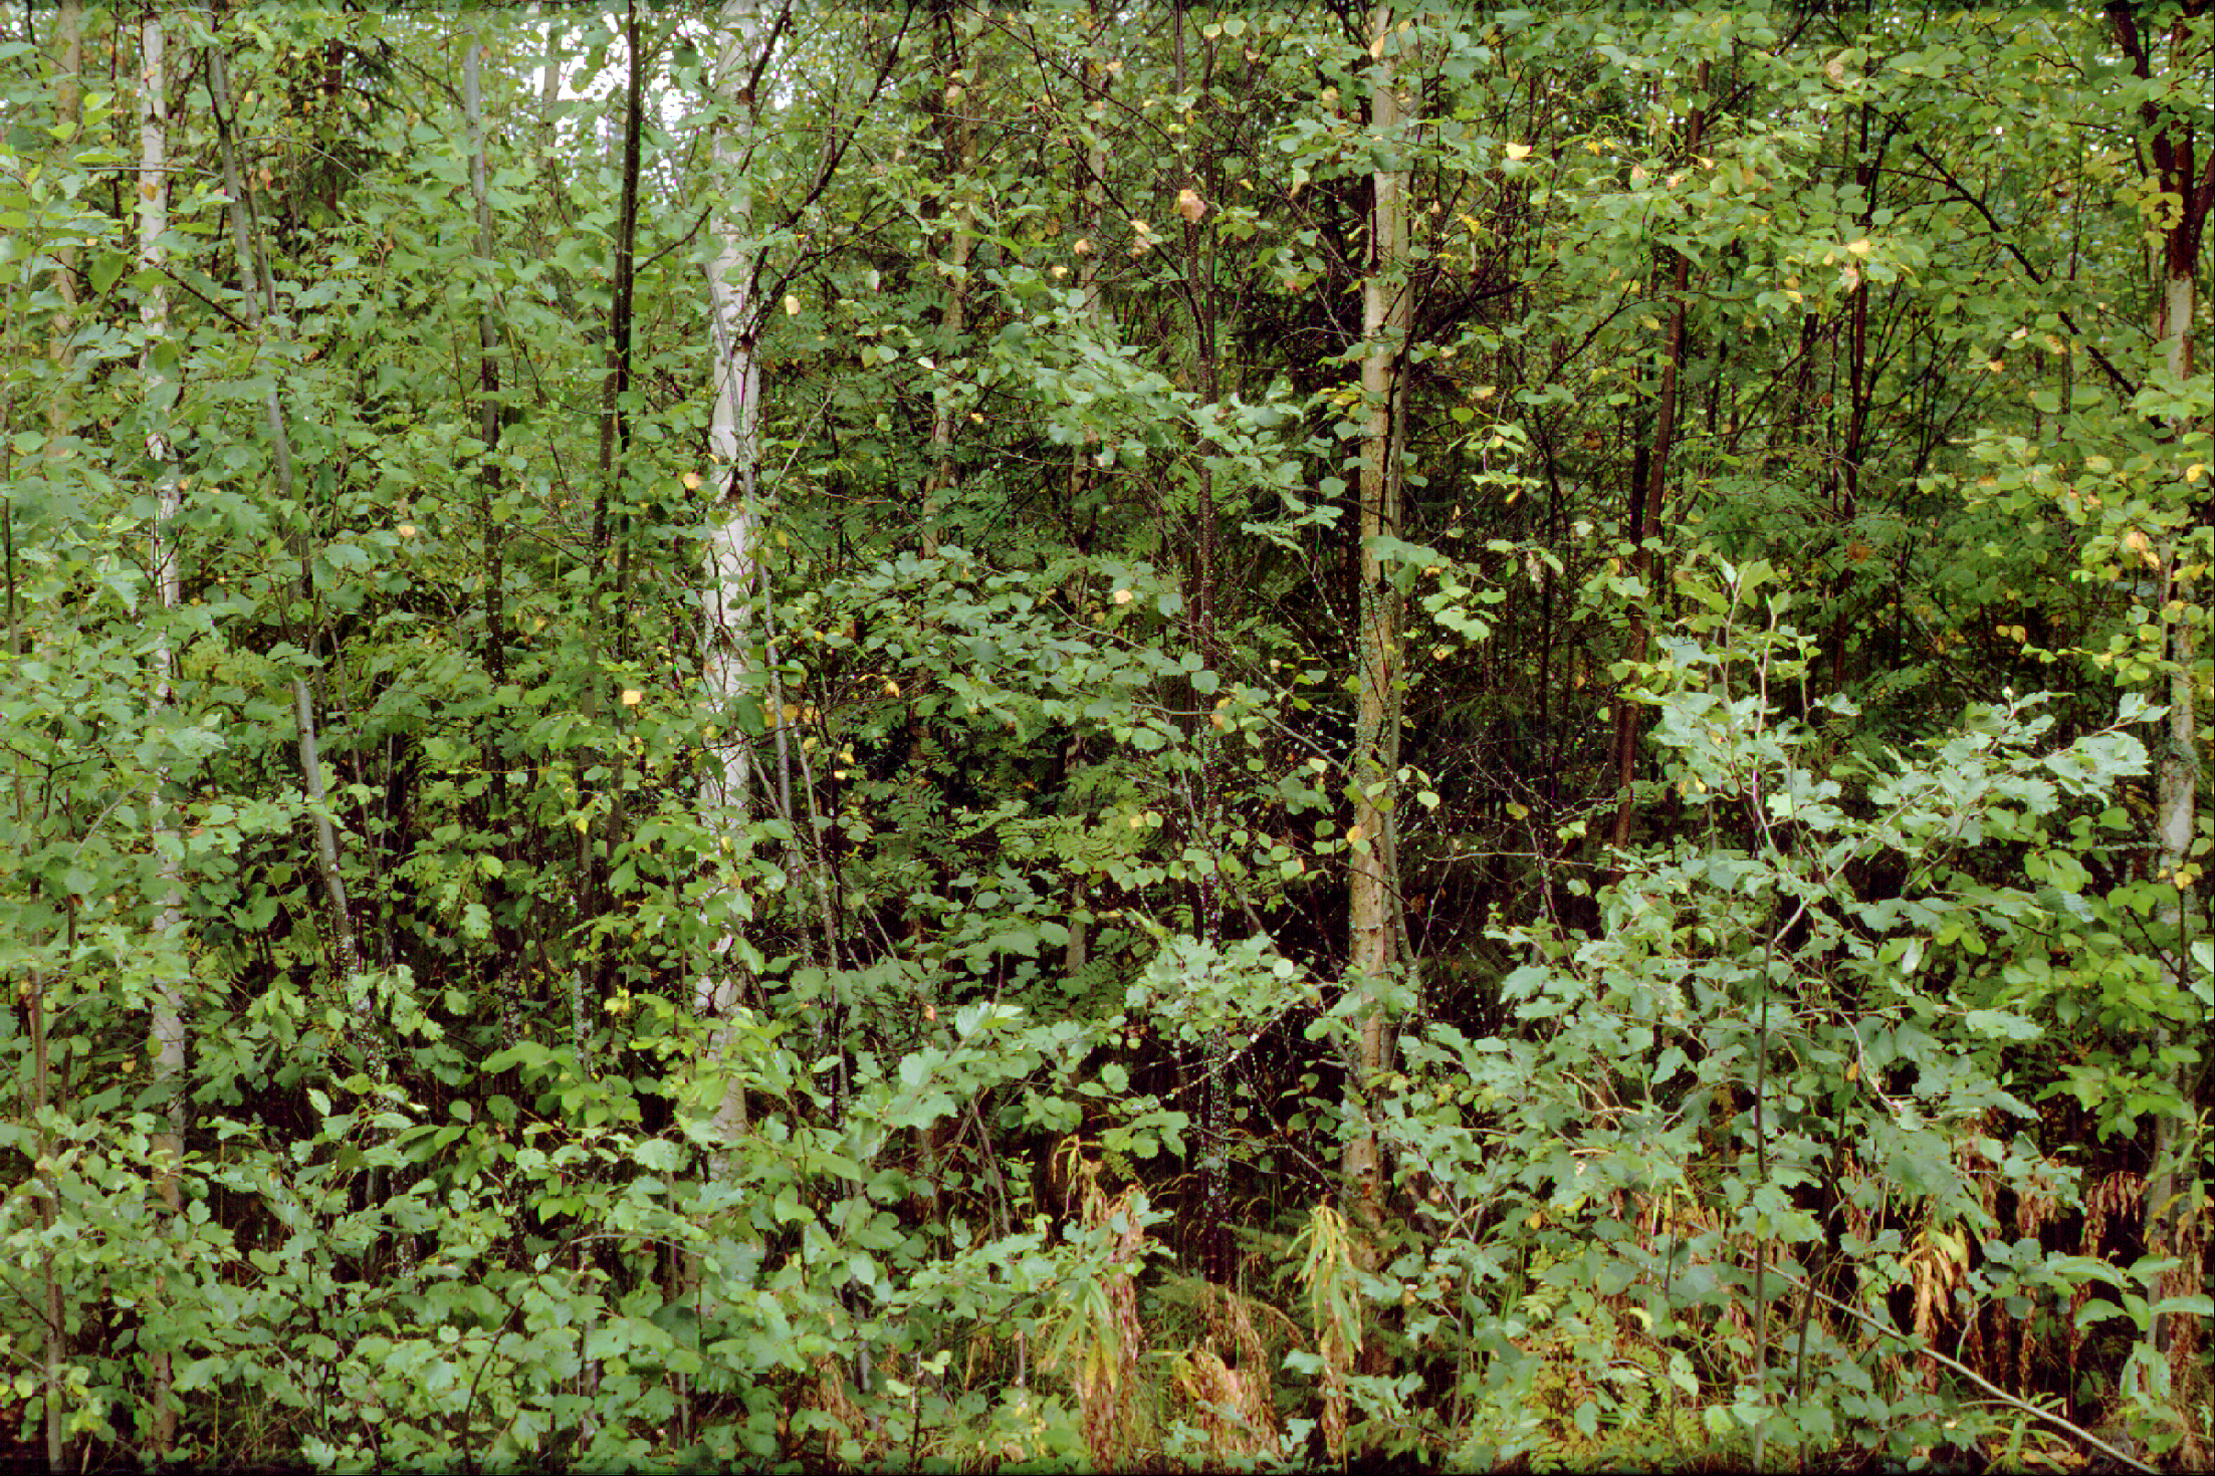 Dense young stands are considered less attractive especially by Finns, when compared to other nationalities, who often view such forests as normal and pleasant. Photo: Harri Silvennoinen